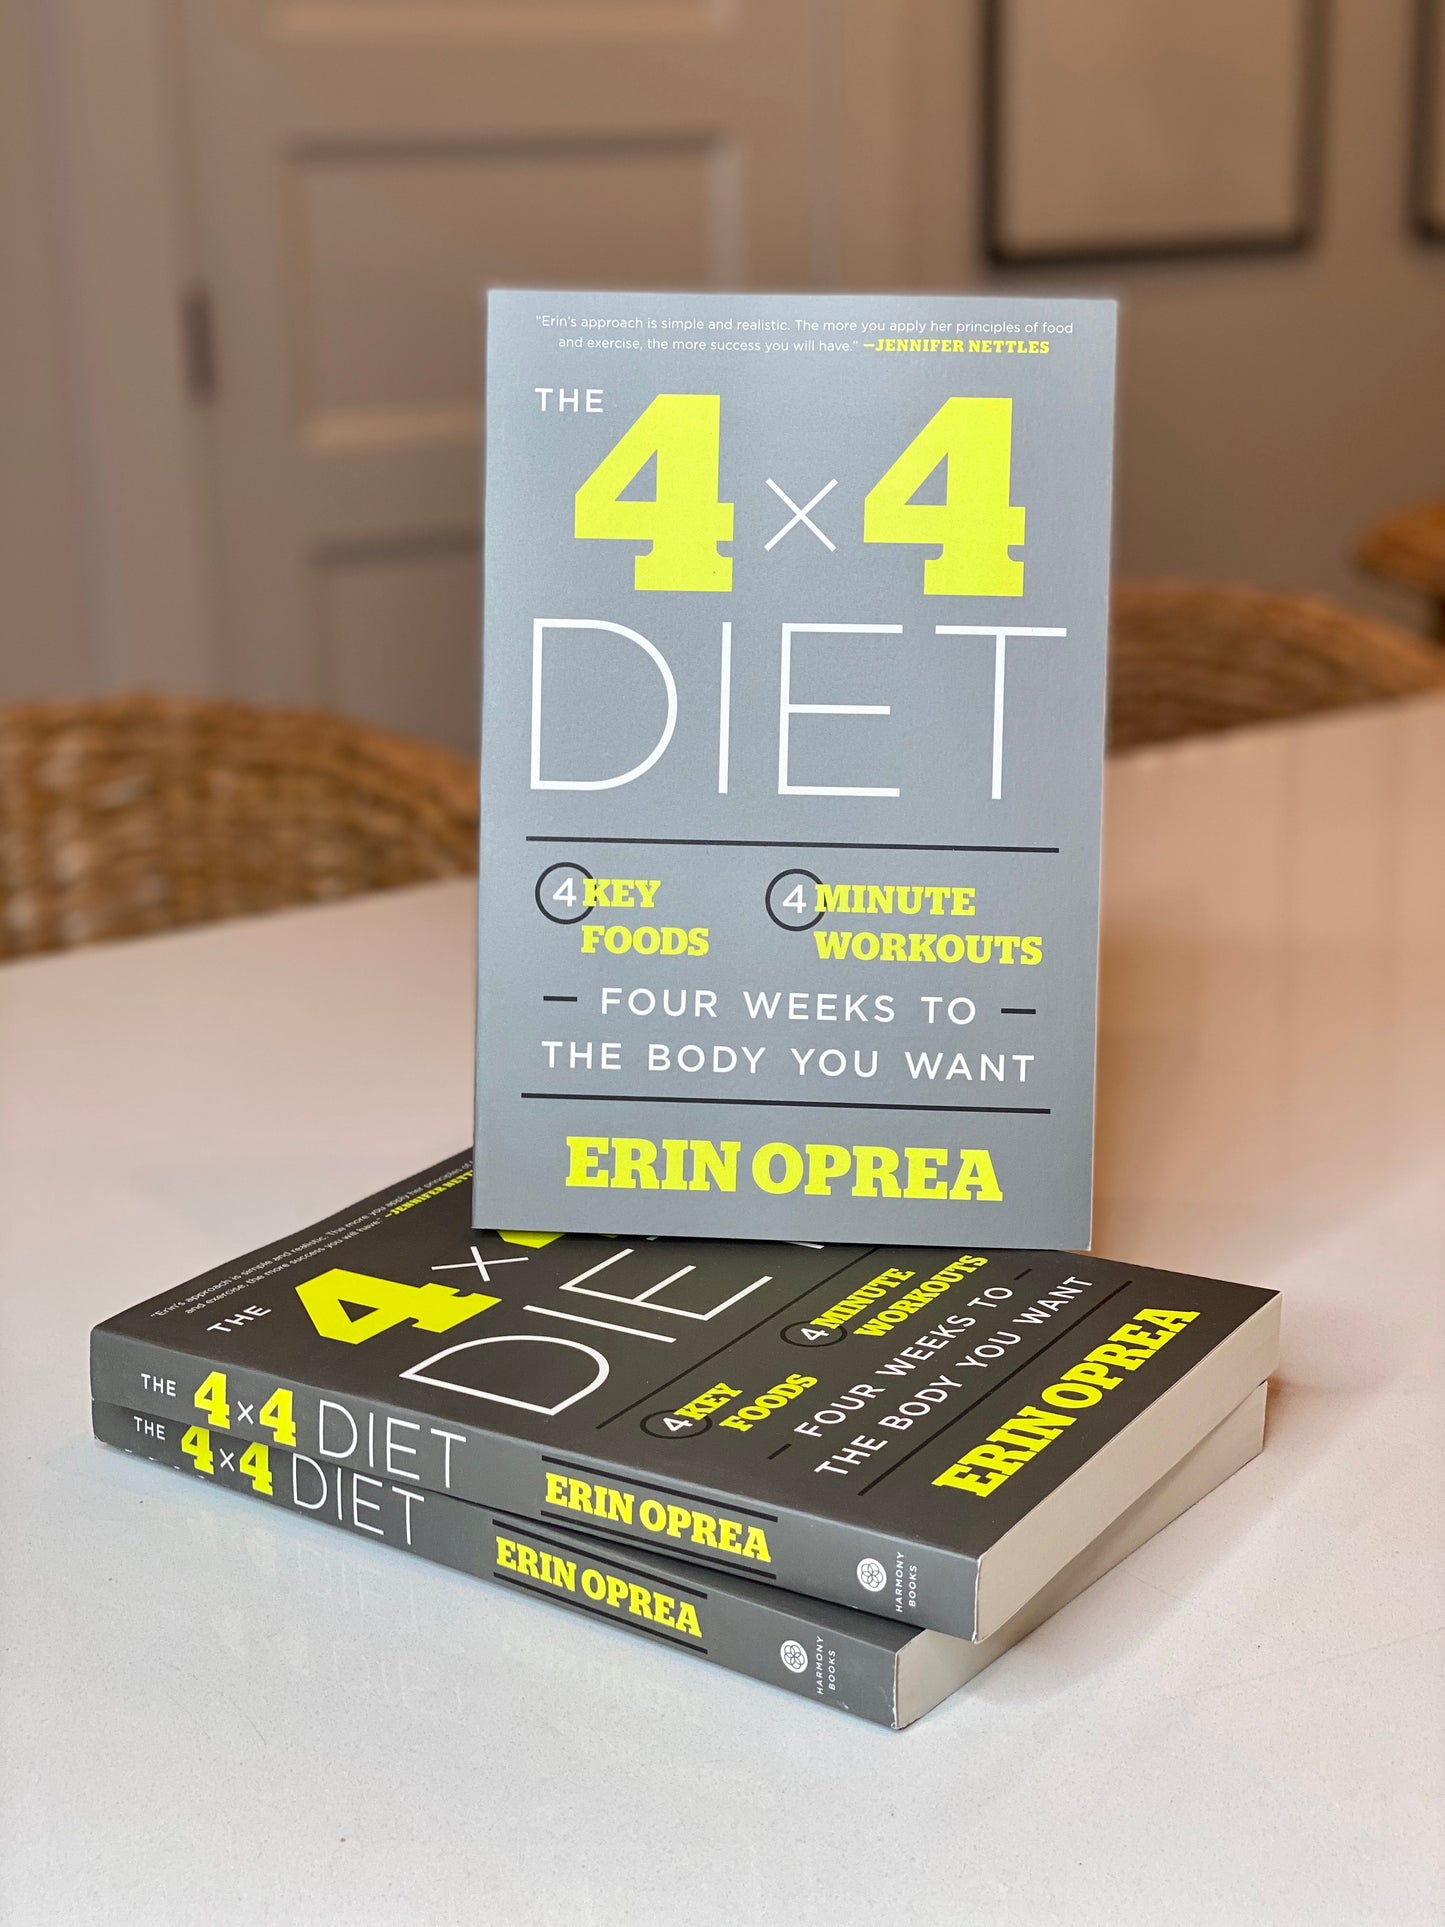 Signed Copy of The 4x4 Diet (PaperBack)